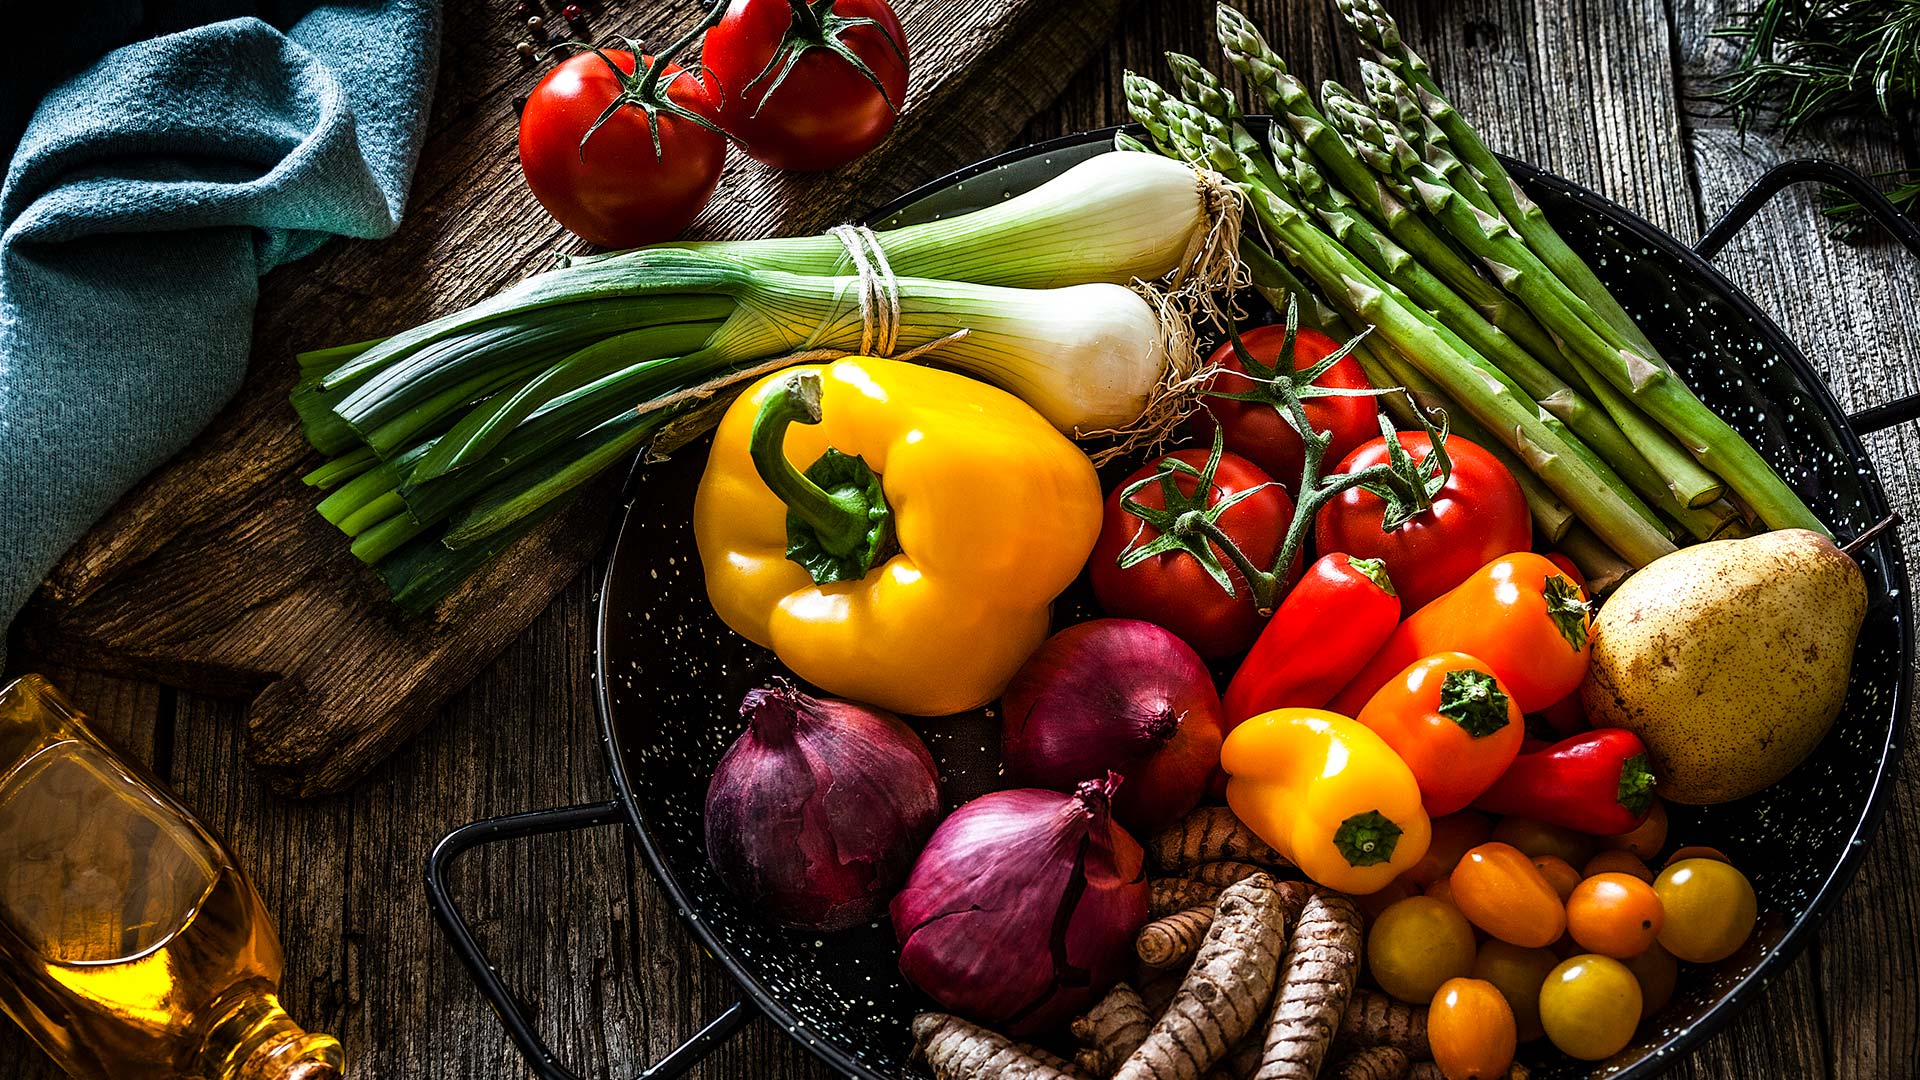 Six Great Reasons to Eat Your Vegetables